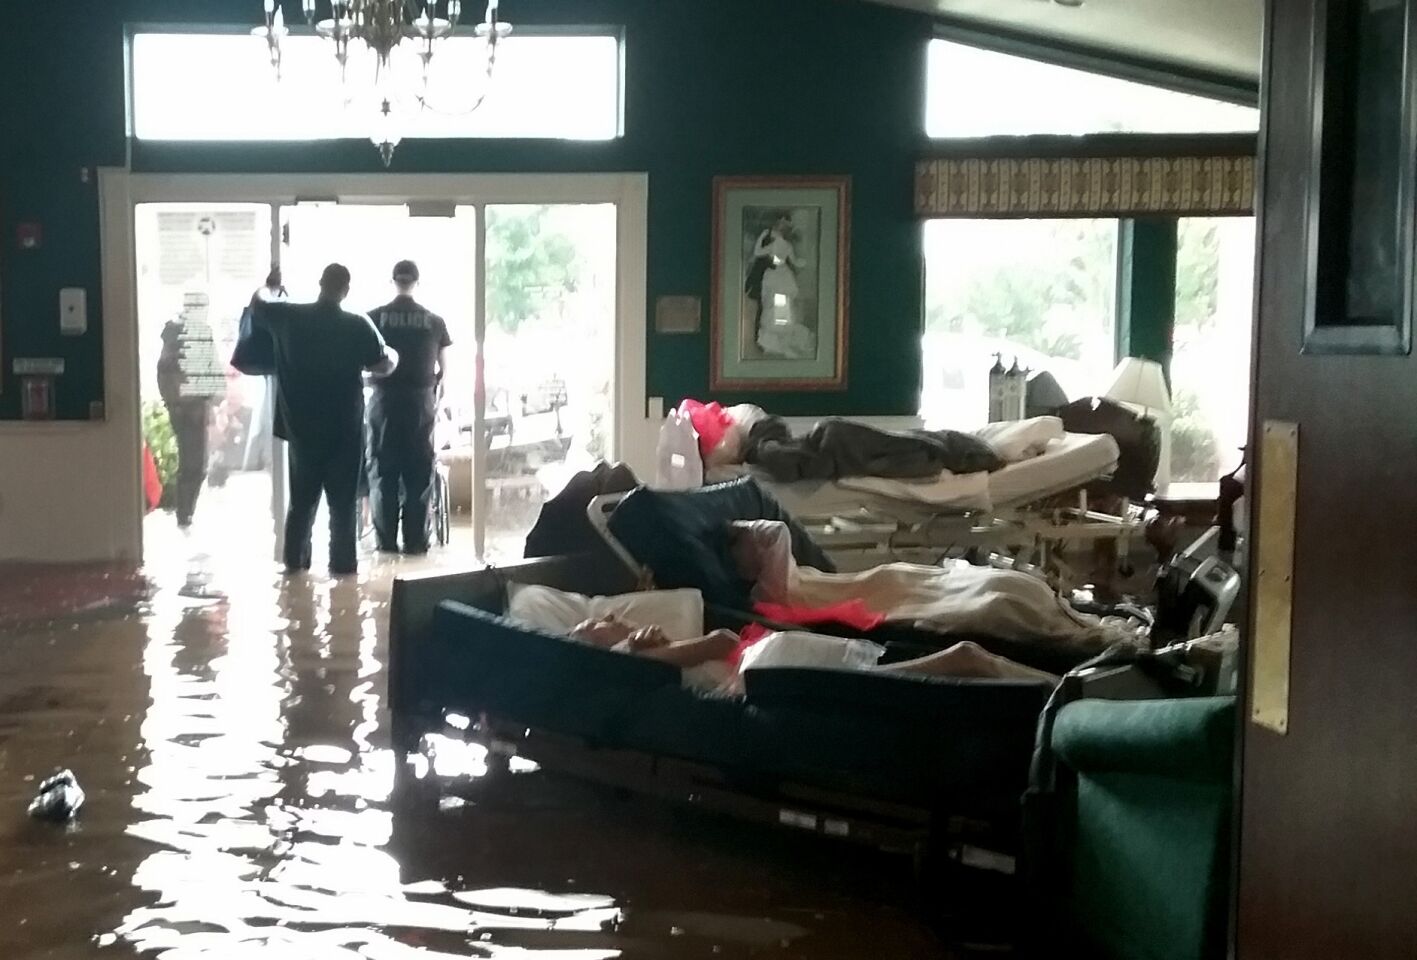 Residents lie on sofas as they wait to be evacuated from the Cypress Glen senior care facility in Port Arthur, Texas, which was inundated with floodwaters from Tropical Storm Harvey on Wednesday.